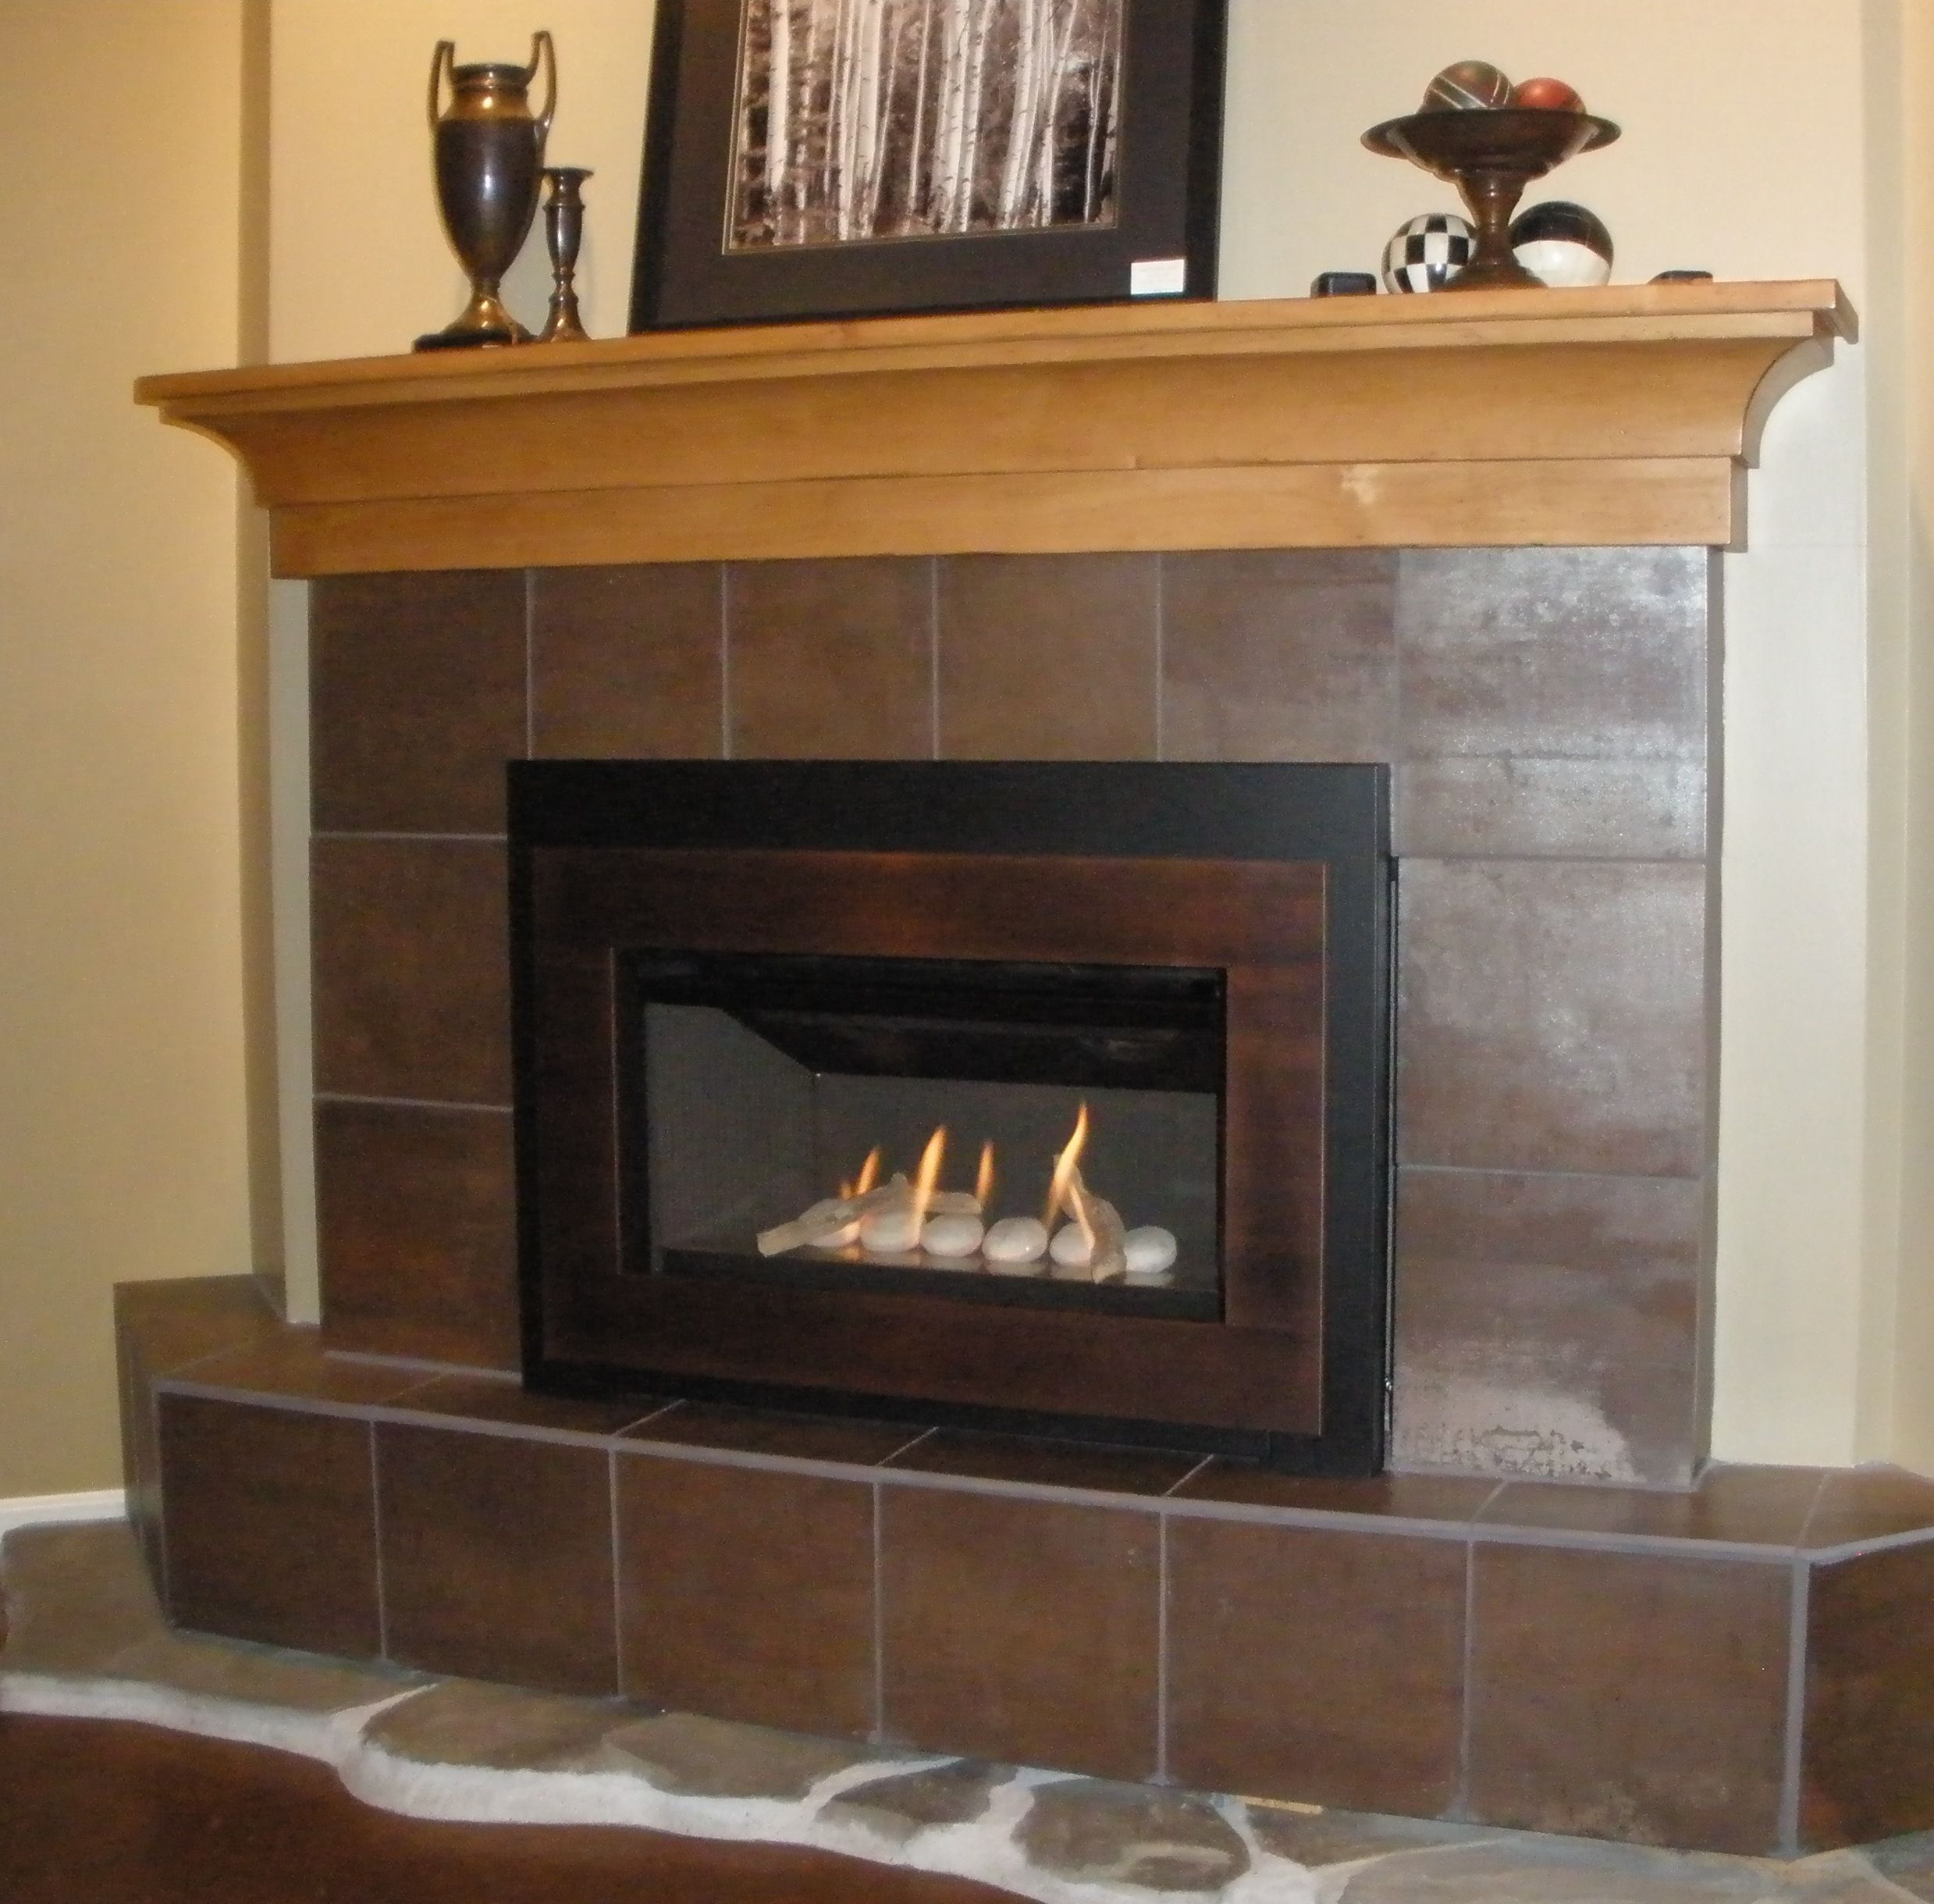 Ambient Fireplace Remote Beautiful Pin On Valor Radiant Gas Fireplaces Midwest Dealer